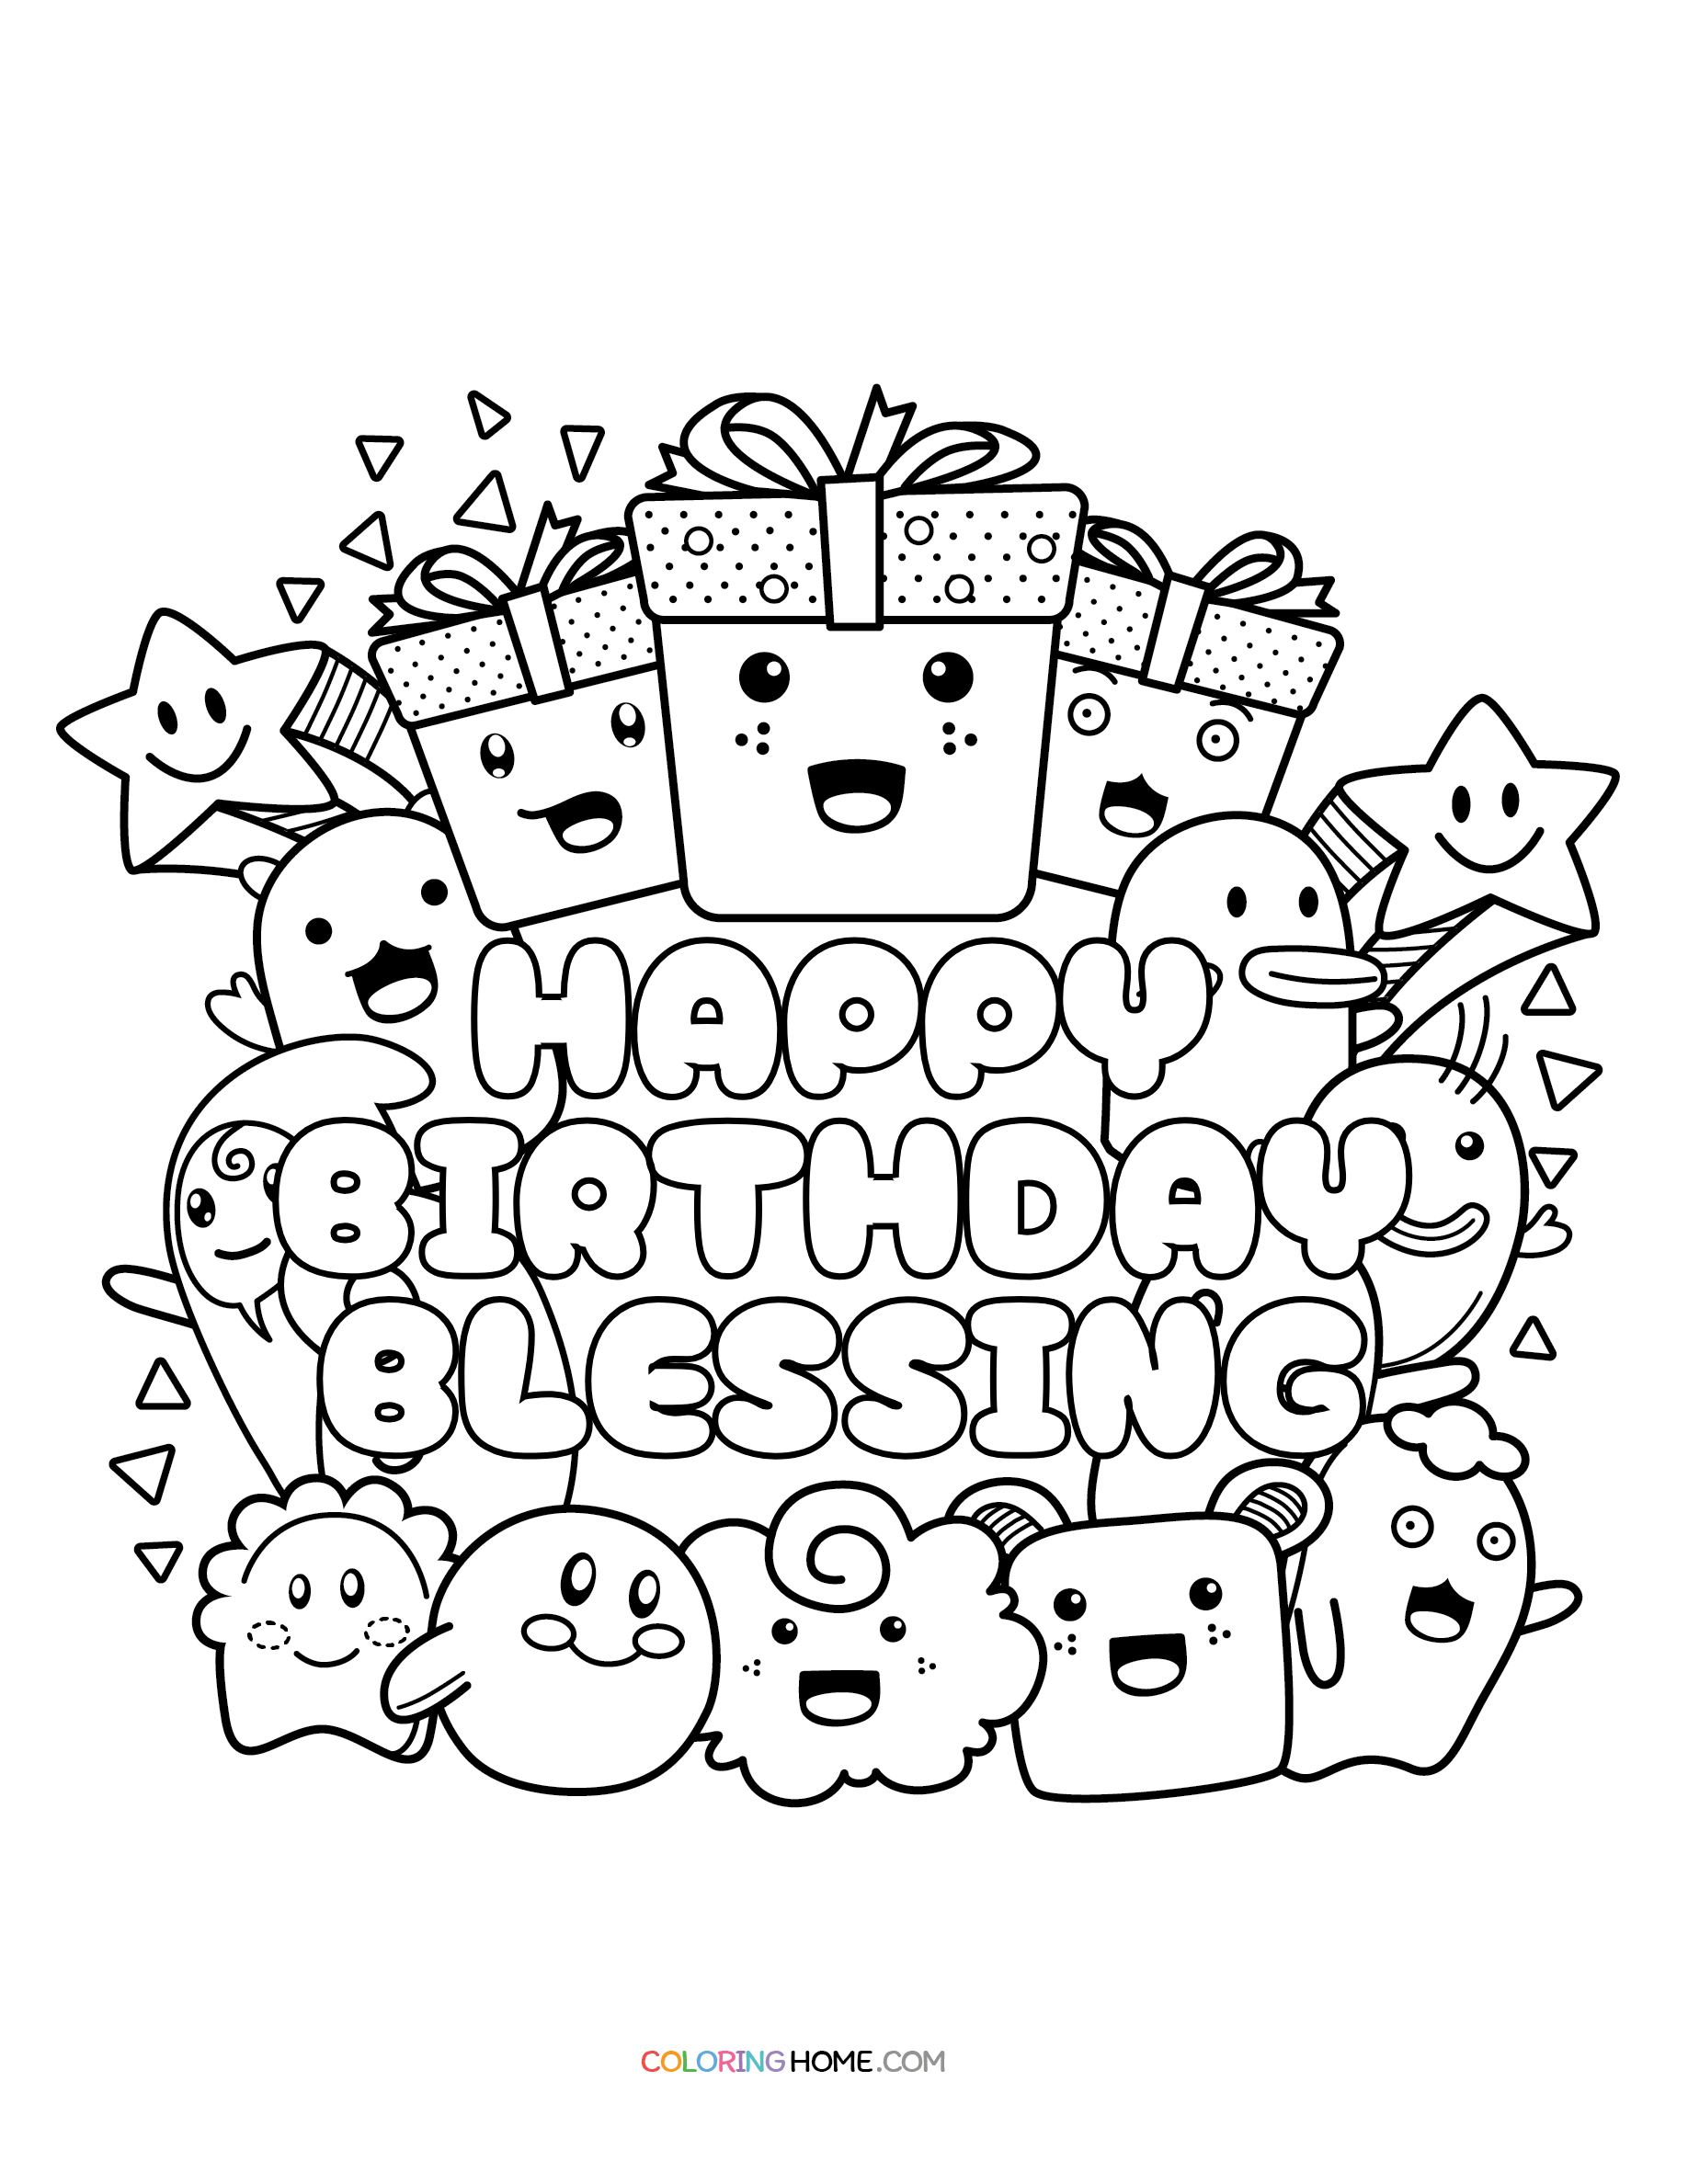 Happy Birthday Blessing coloring page